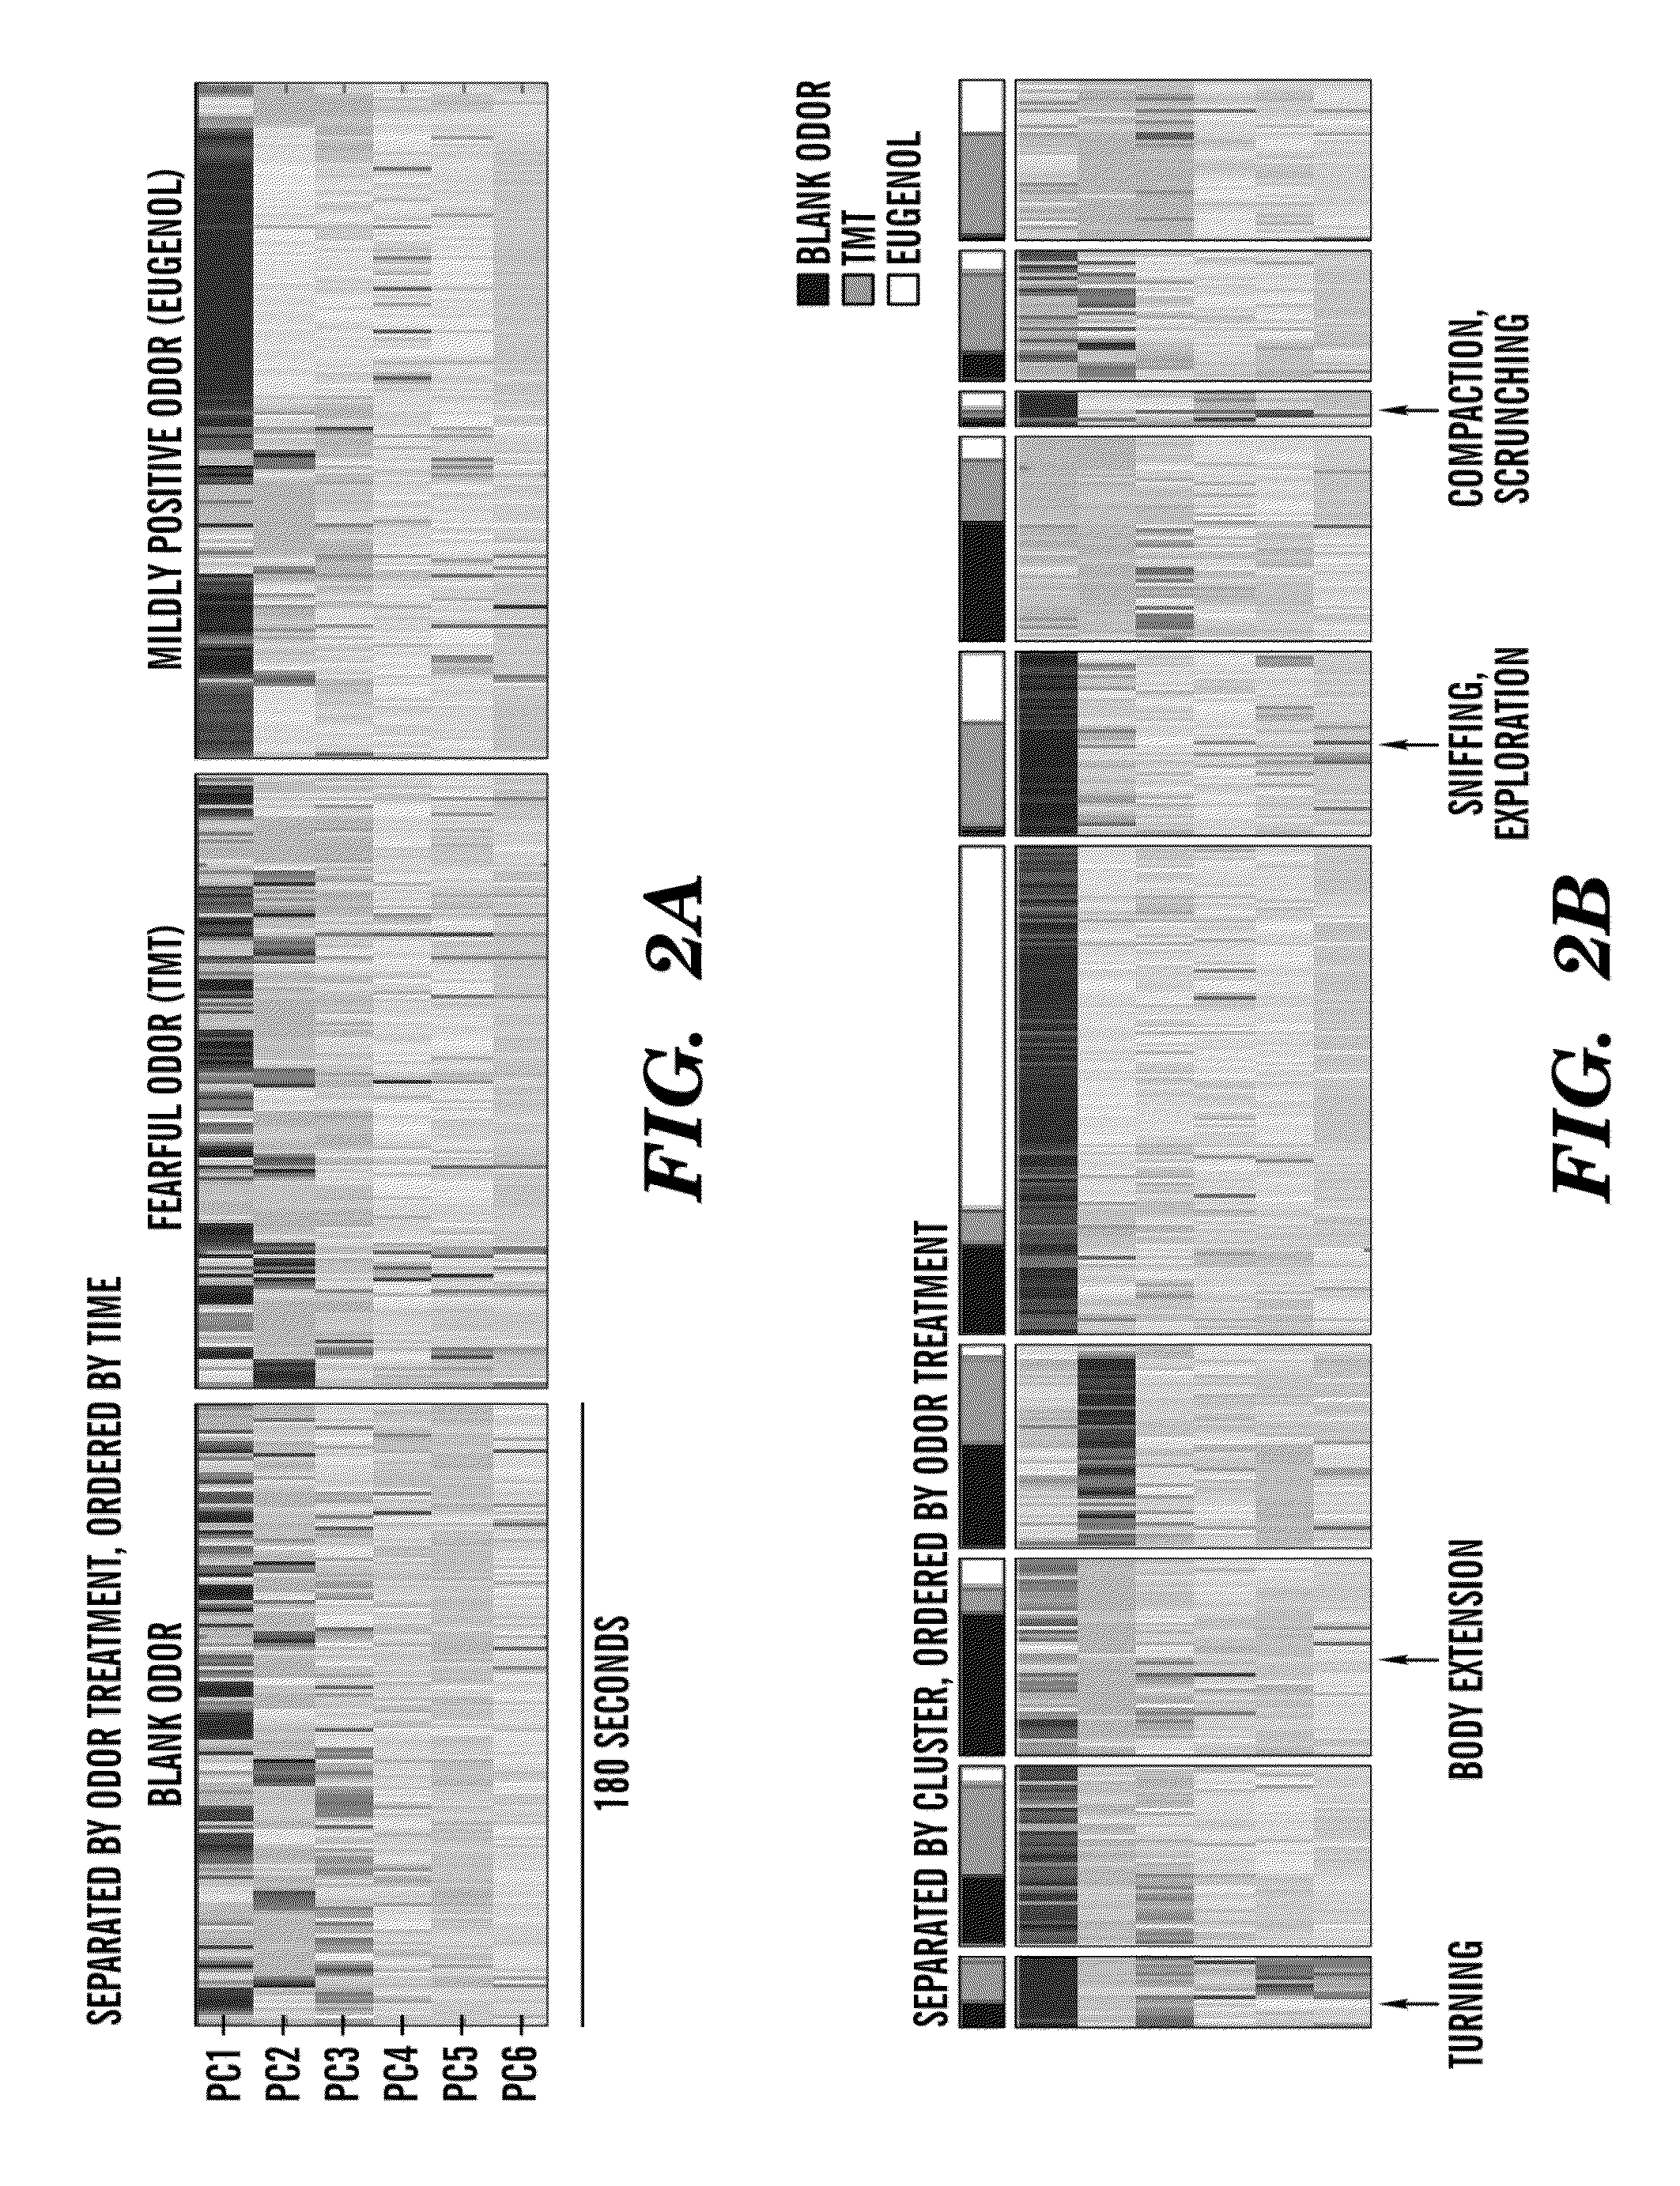 System and method for automatically discovering, characterizing, classifying and semi-automatically labeling animal behavior and quantitative phenotyping of behaviors in animals